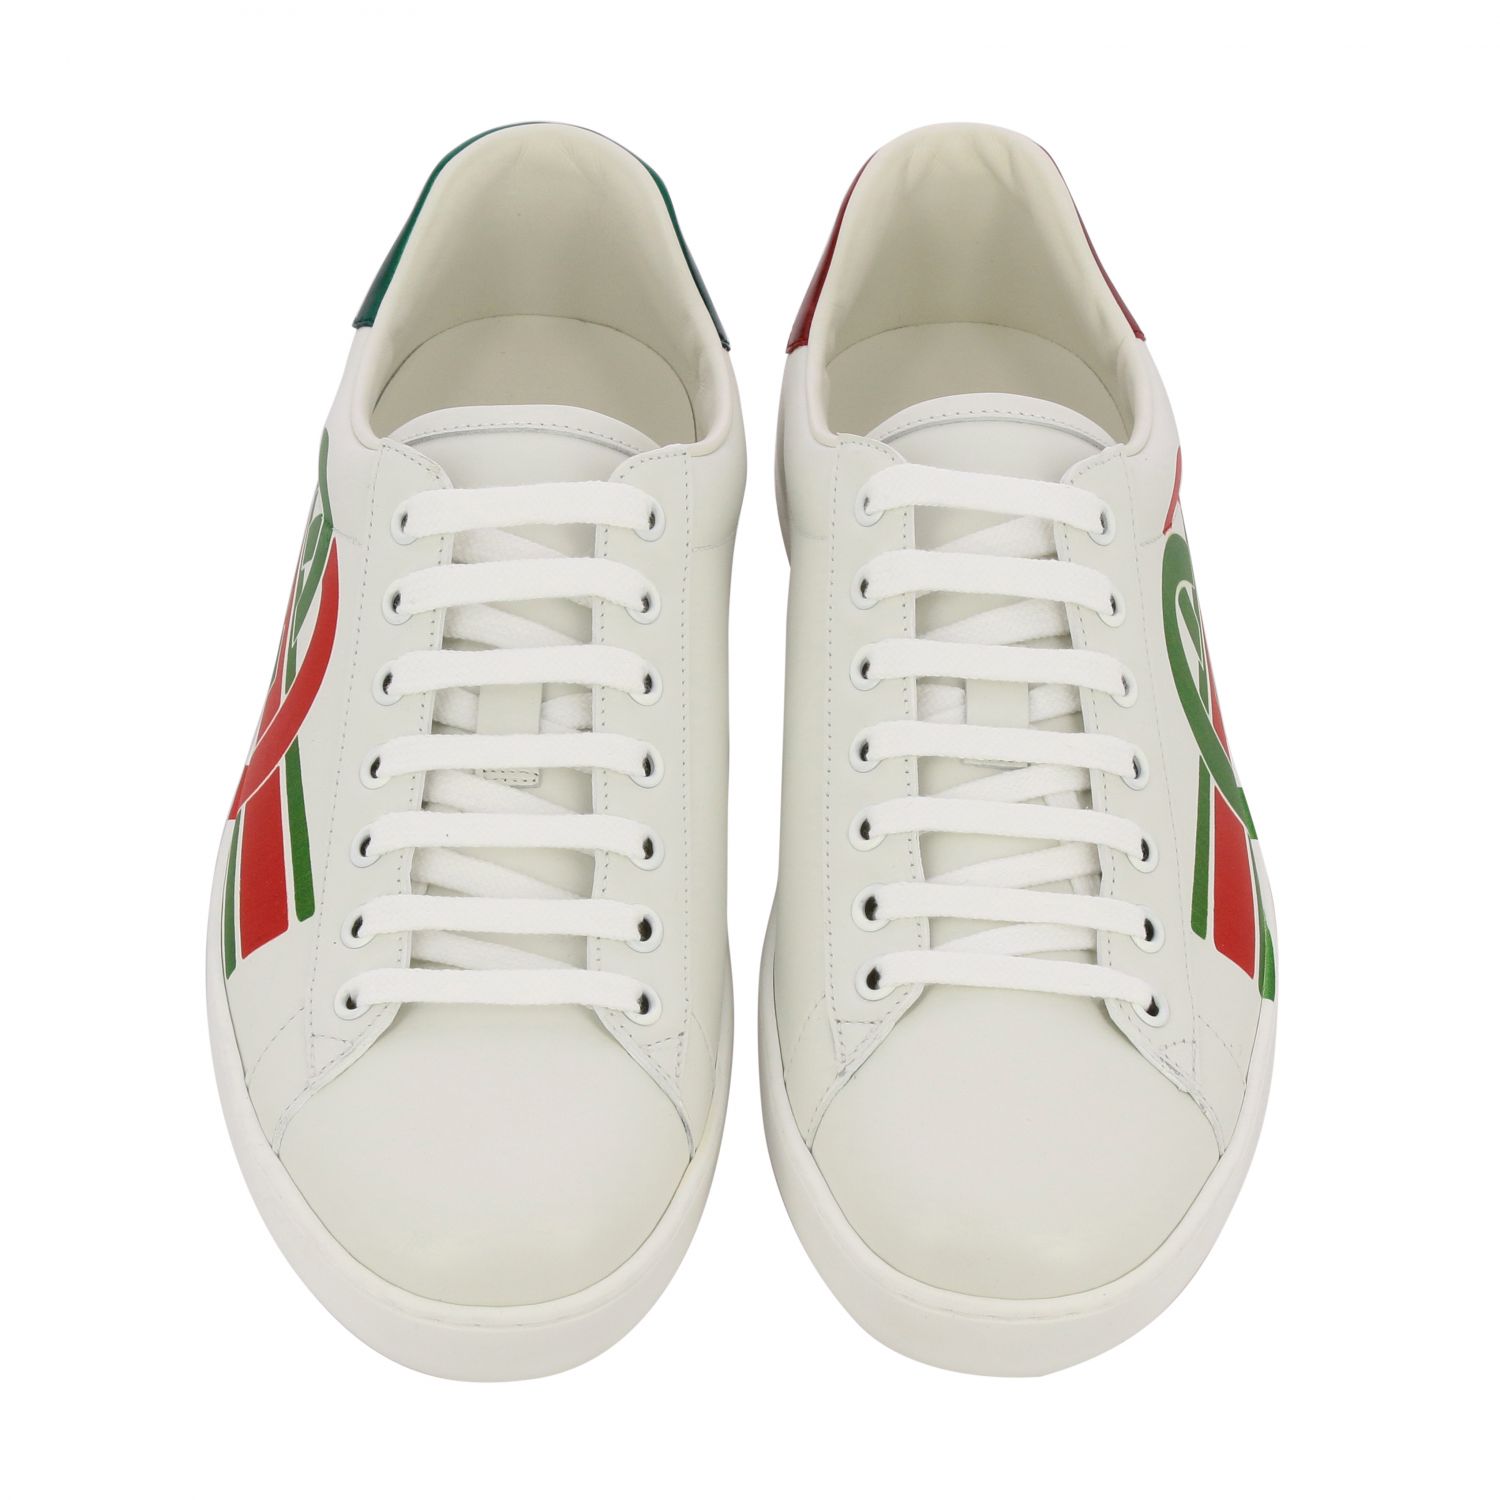 gucci shoes without laces